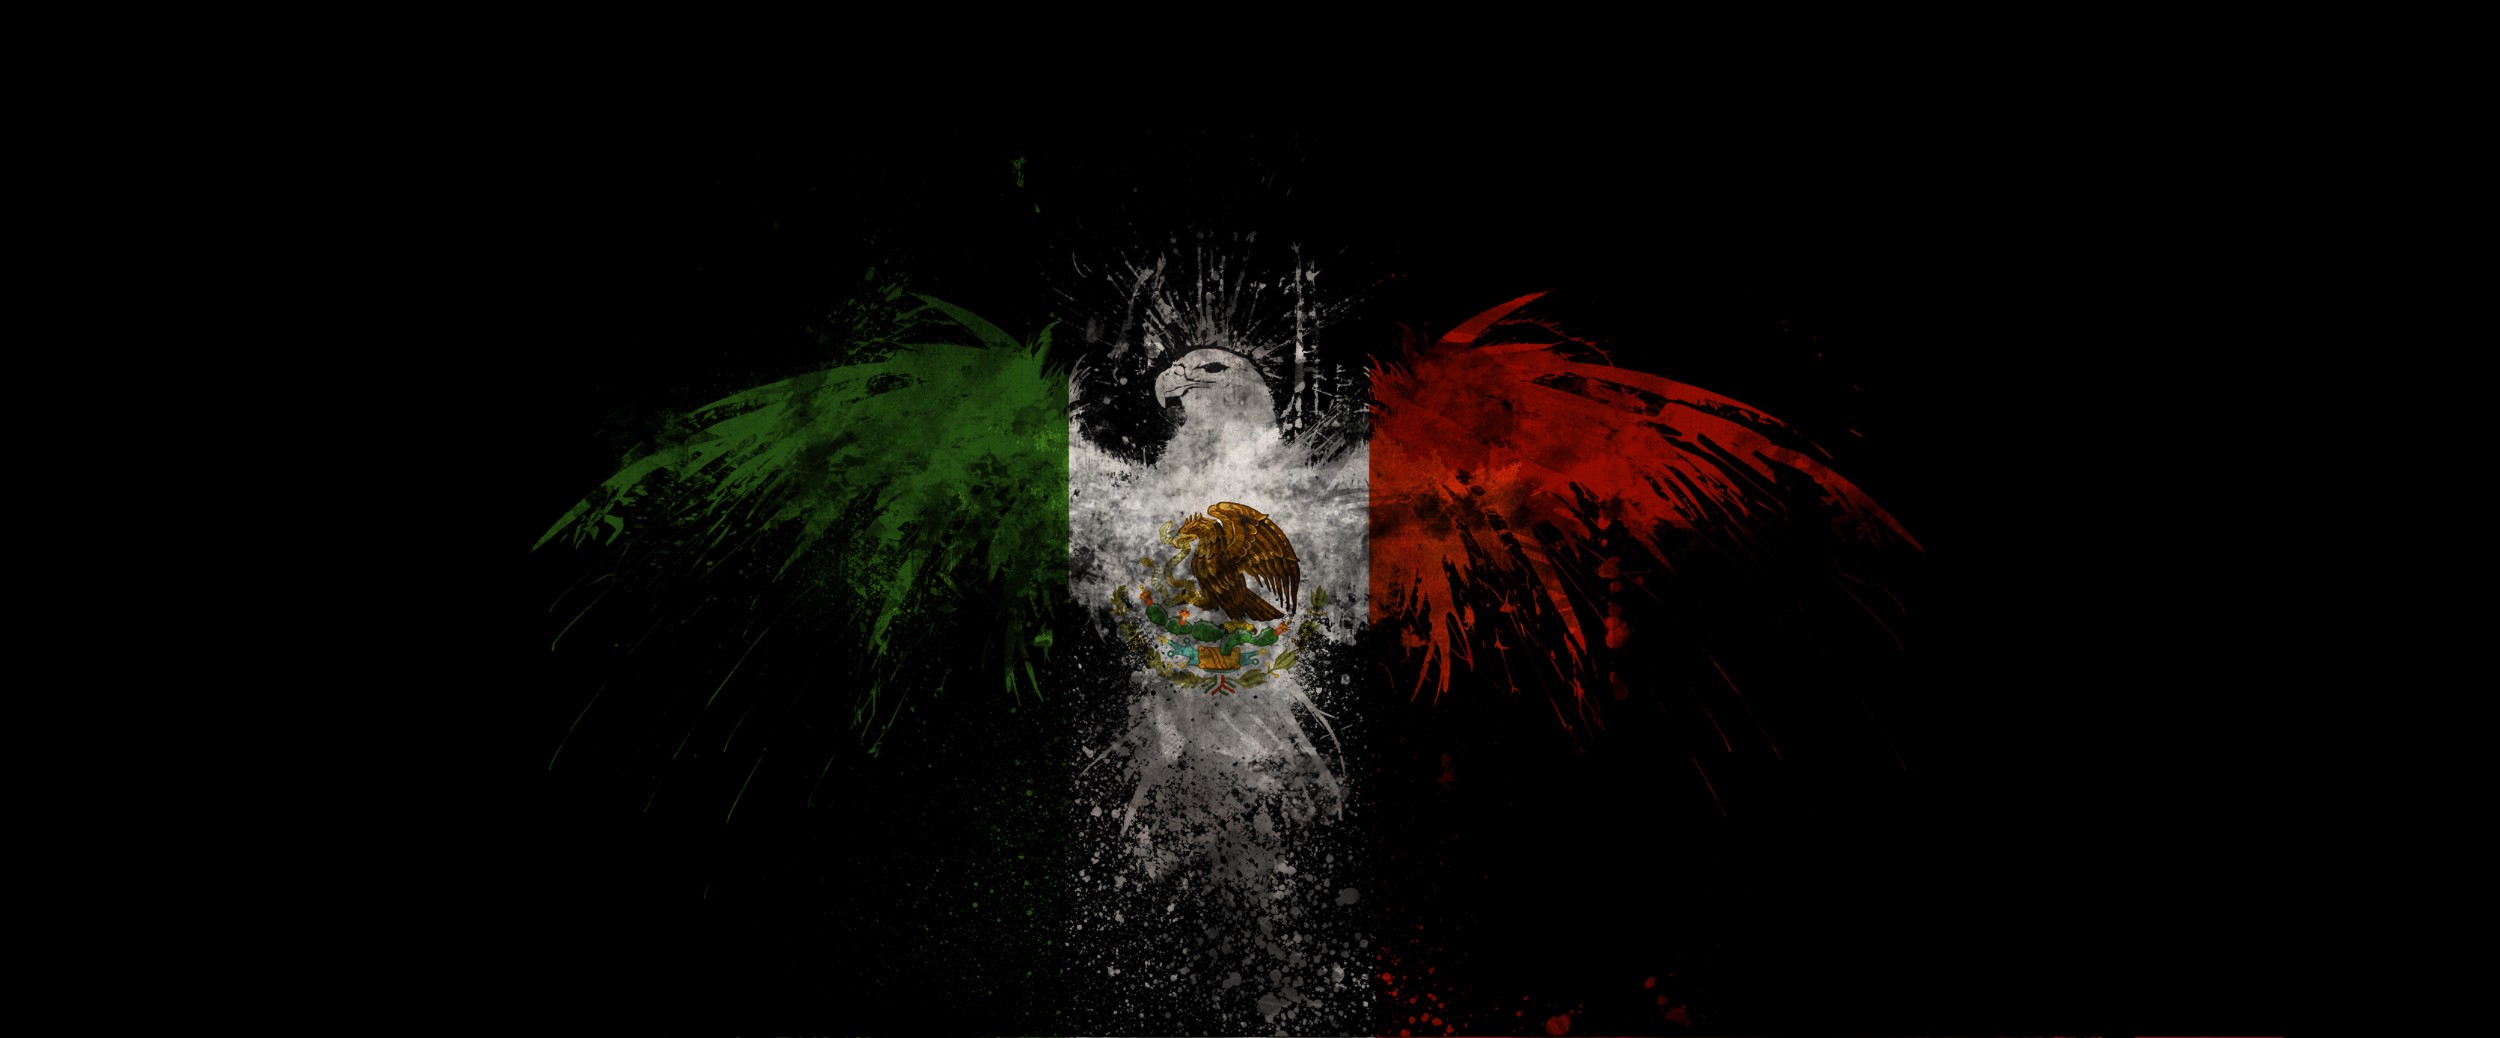 Mexican Wallpaper Images  Free Download on Freepik